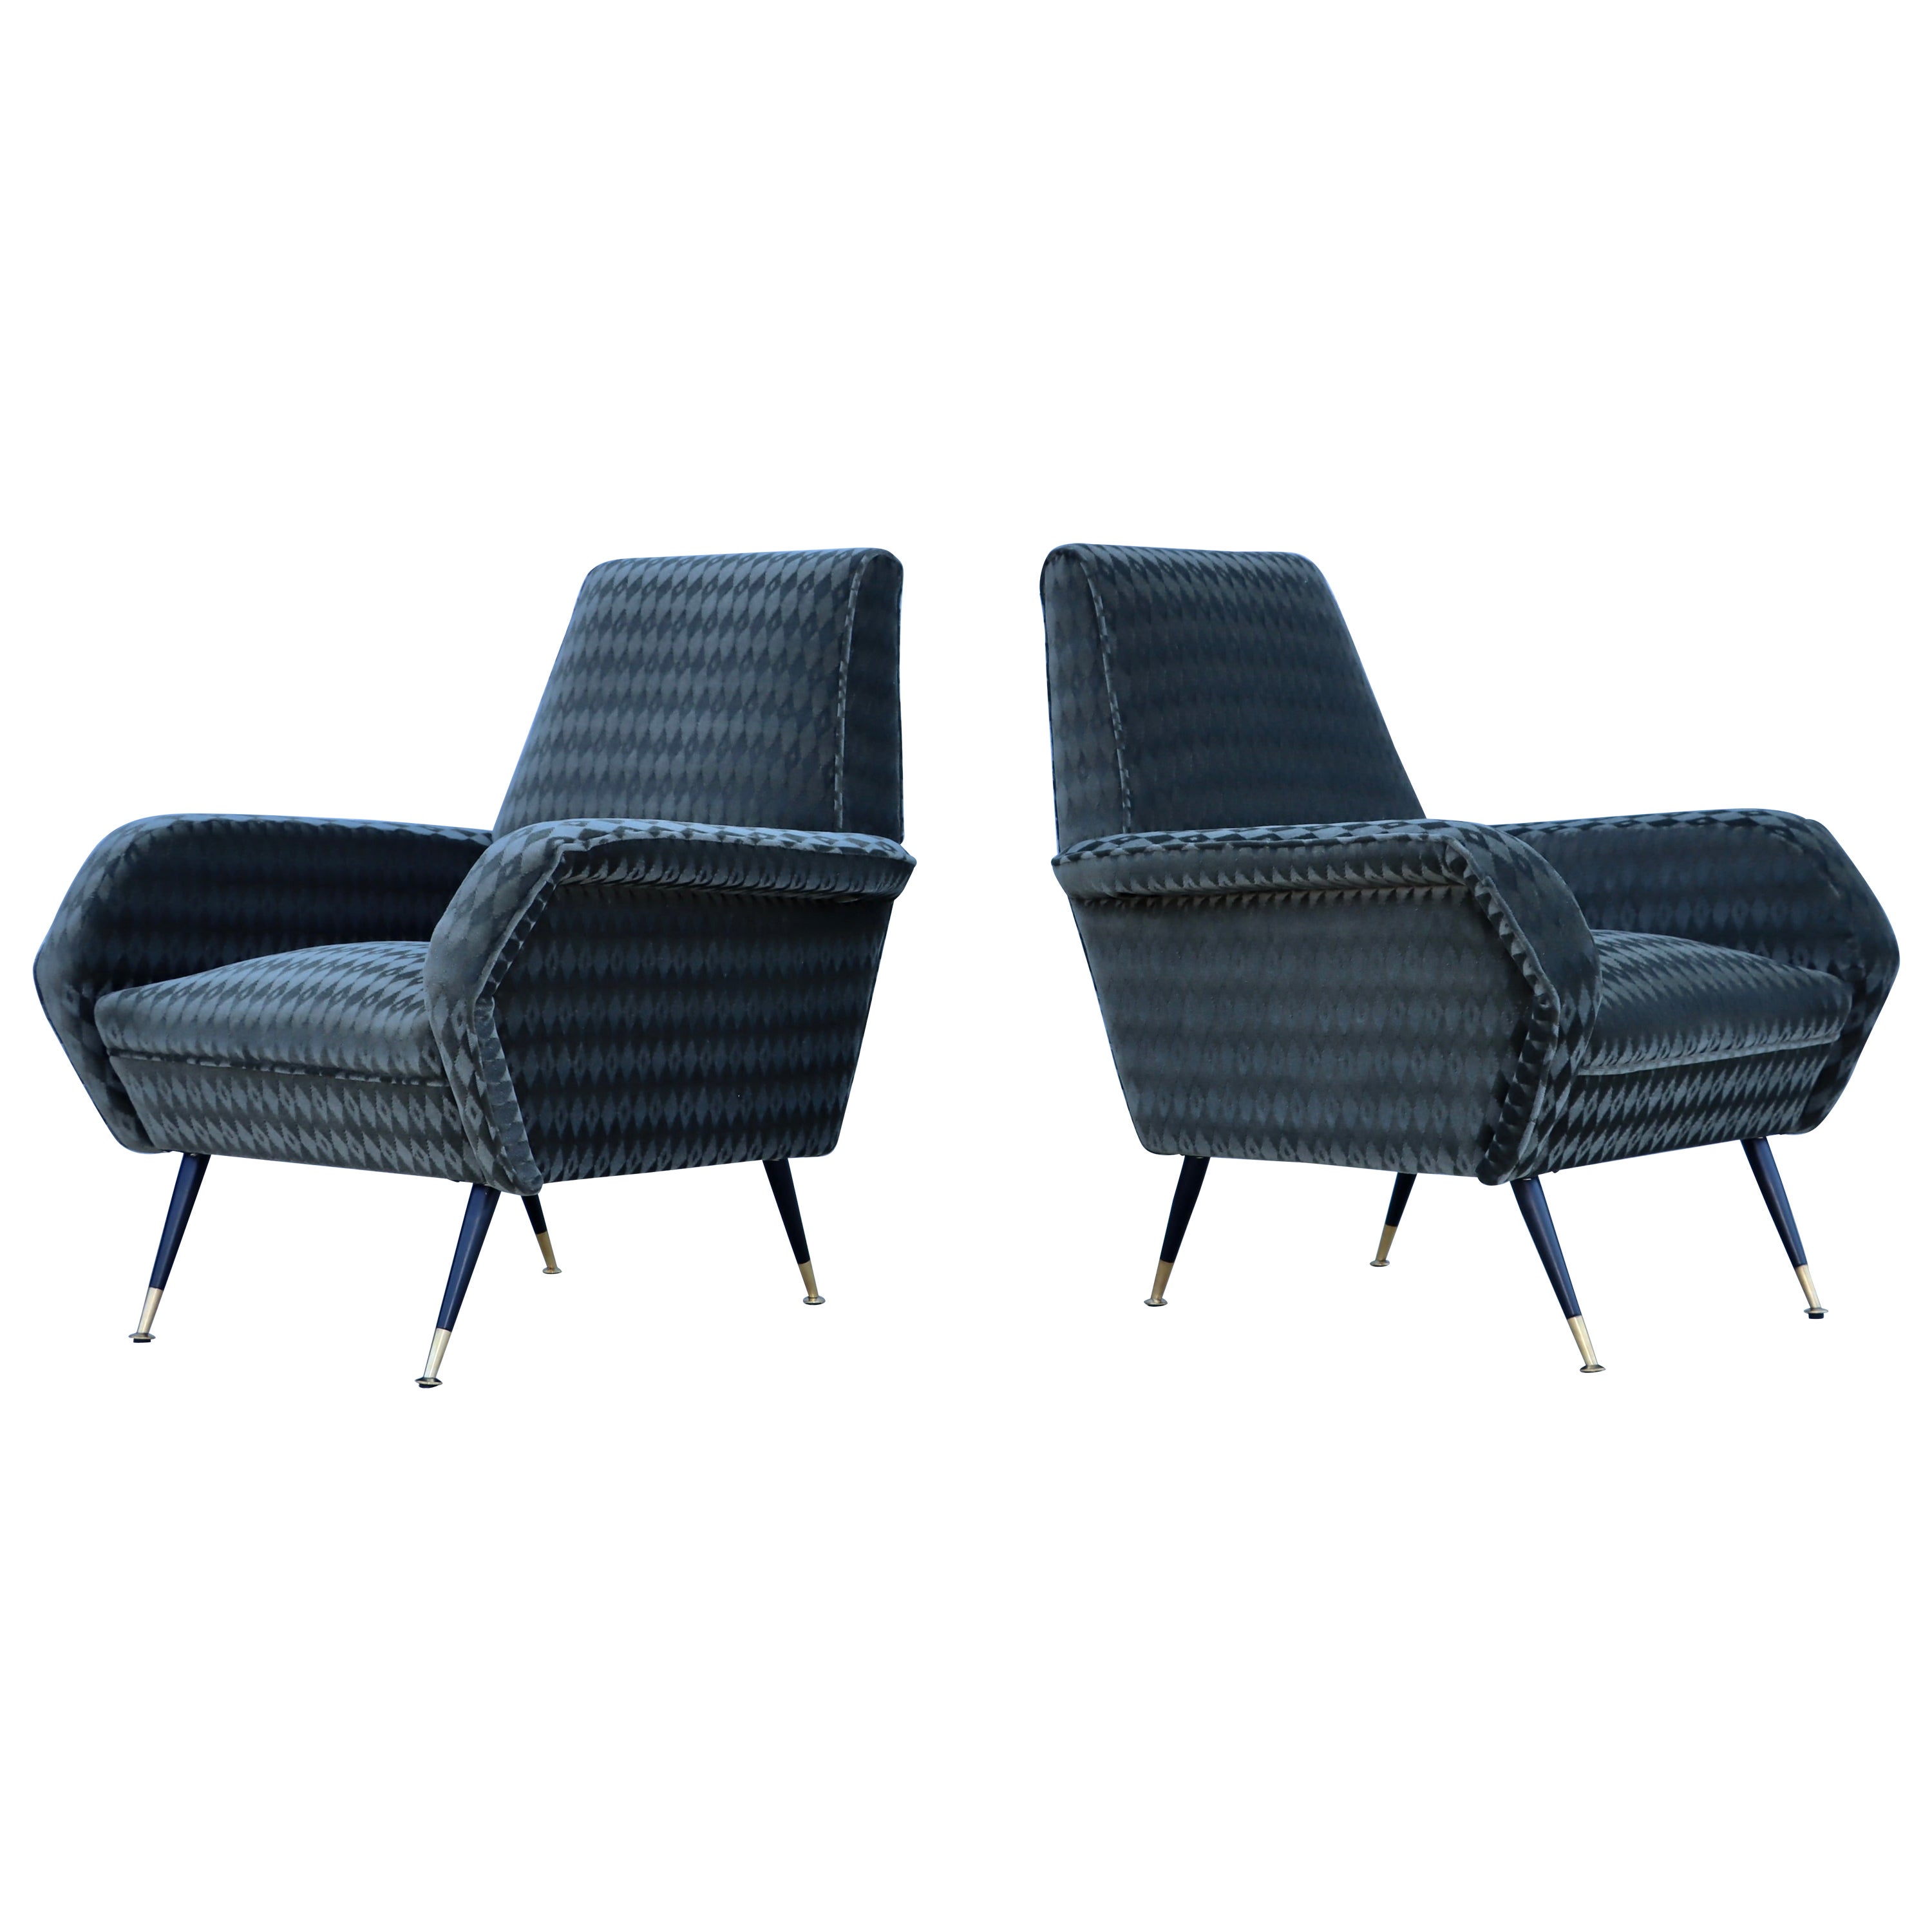 1950's Mid-Century Modern Italian Lounge Chairs With Donghia Mohair Upholstery